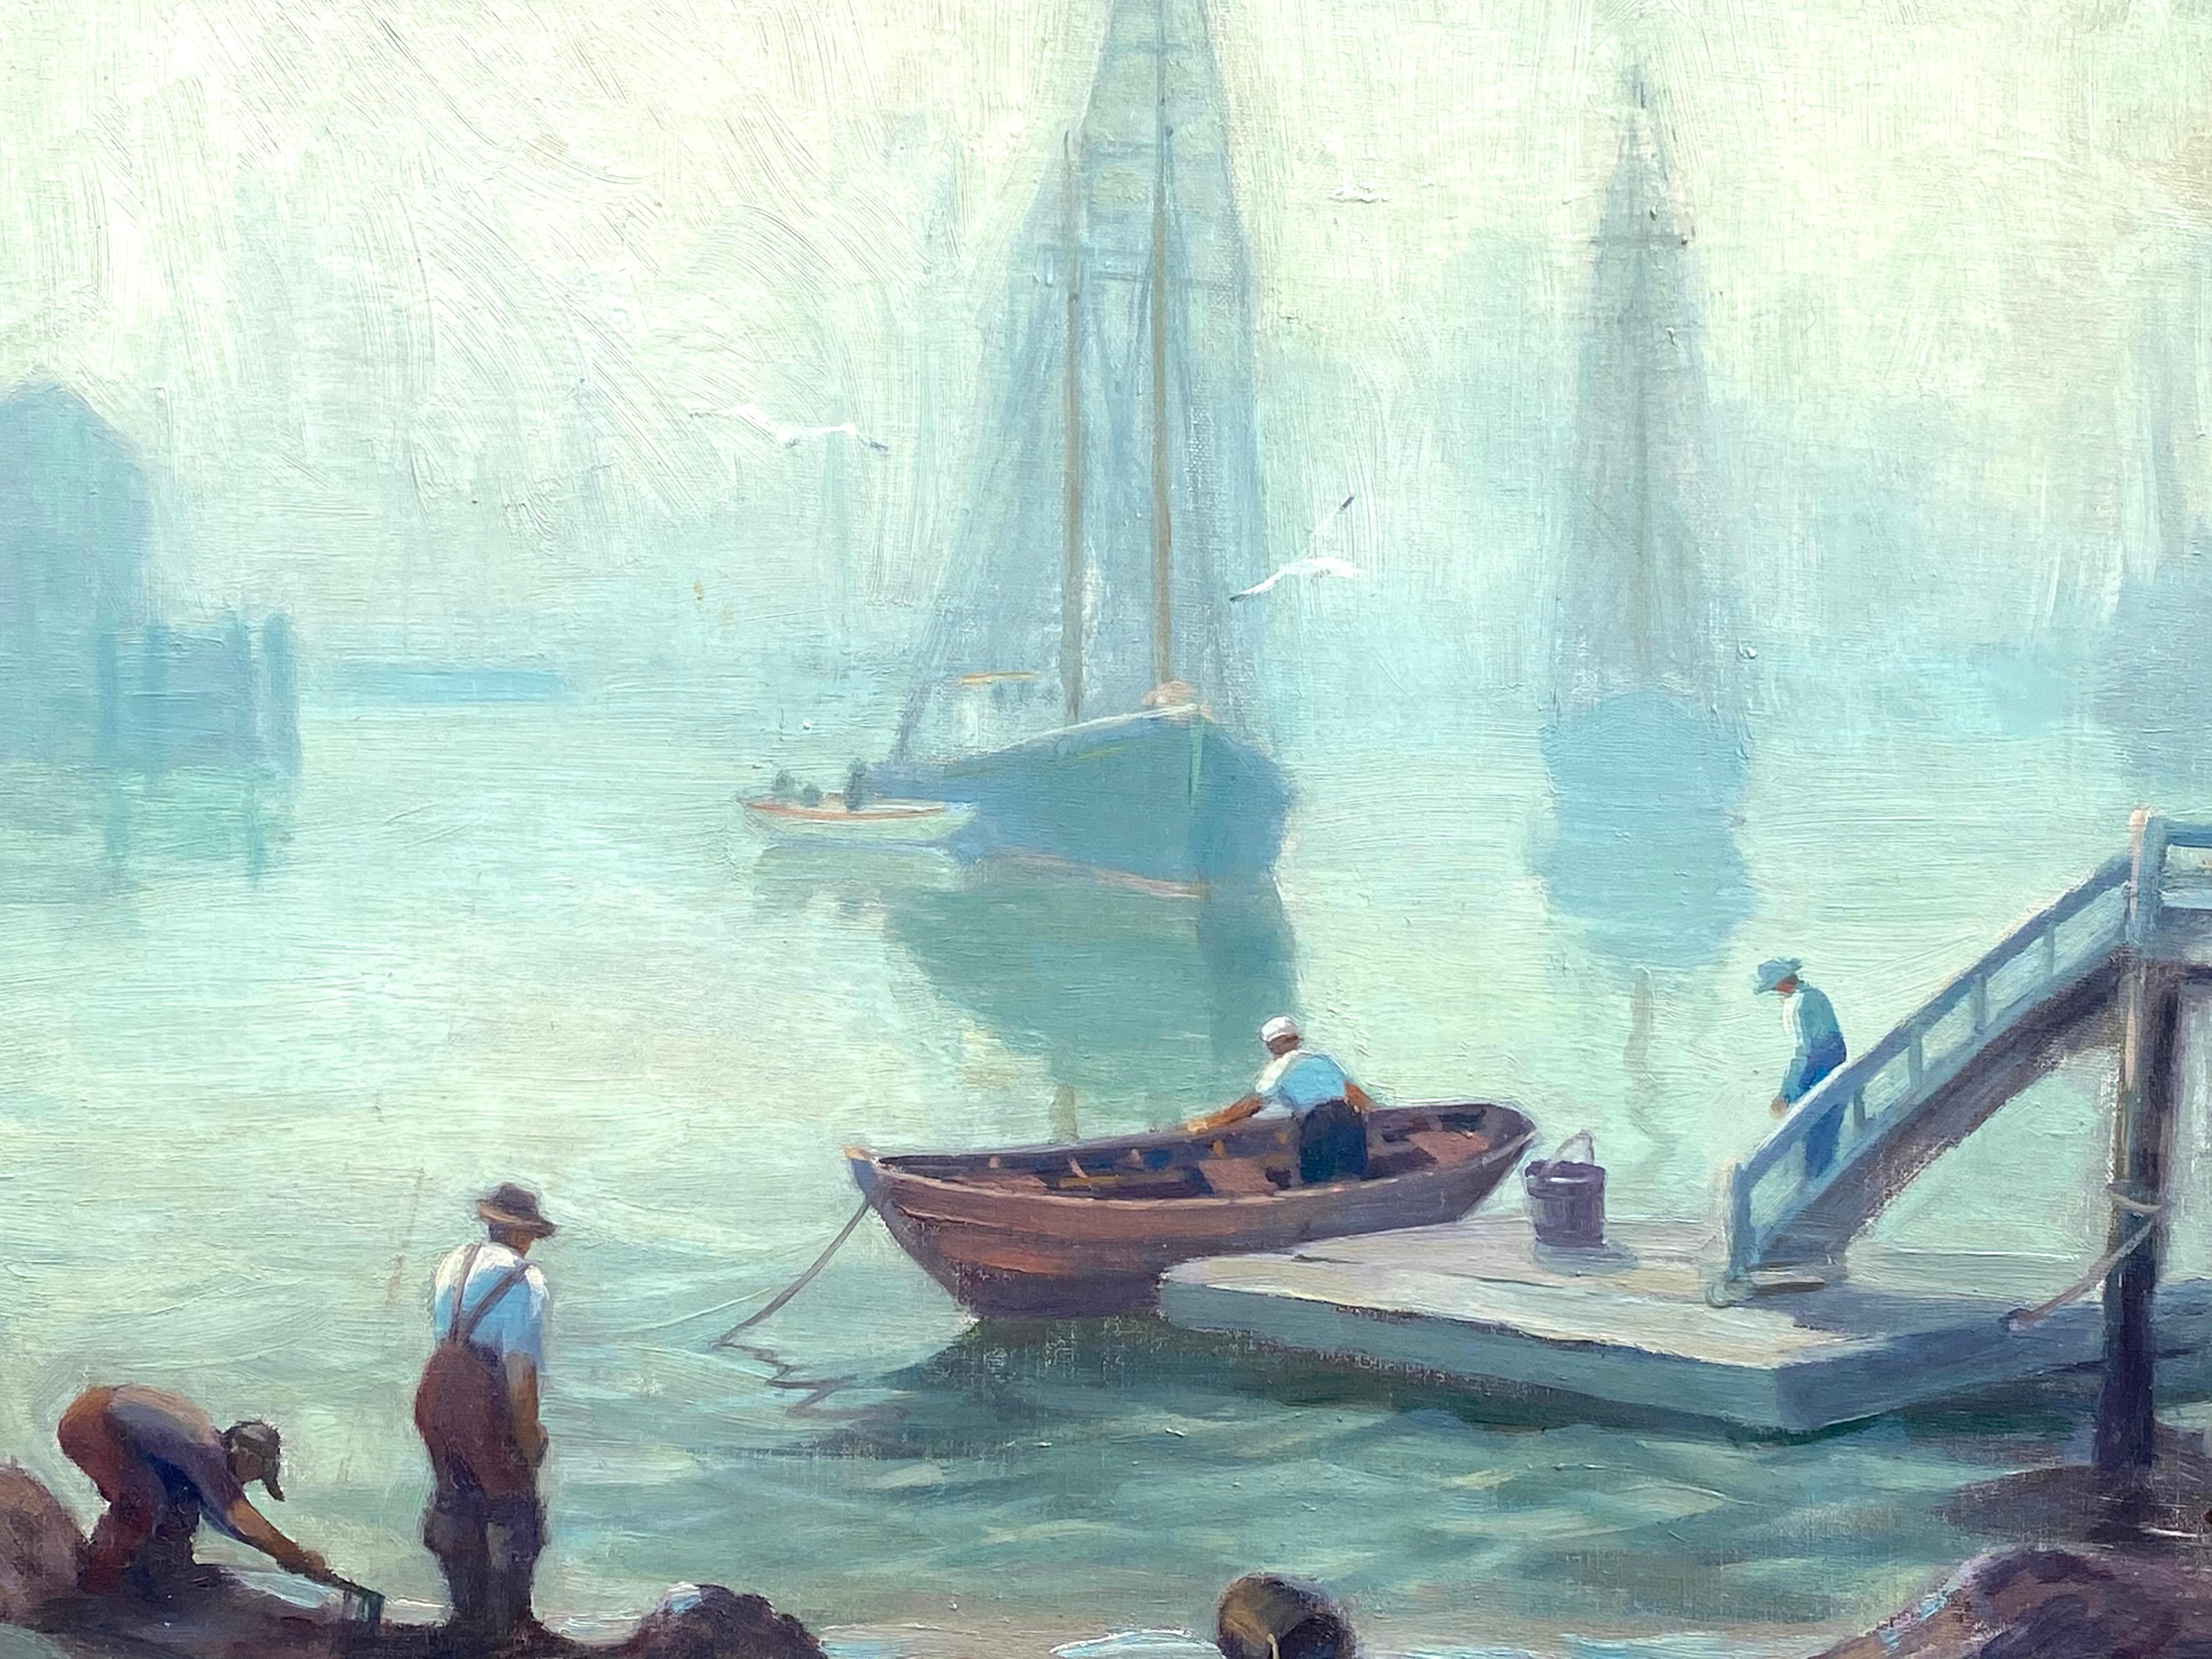 Oil on artist board painting of a misty morning in Gloucester Harbor by the Provincetown artist, Kay Kellogg. Signiert unten links. Circa 1935. The painting depicts fishermen beginning their day at the Gloucester Harbor docks.  The painting is